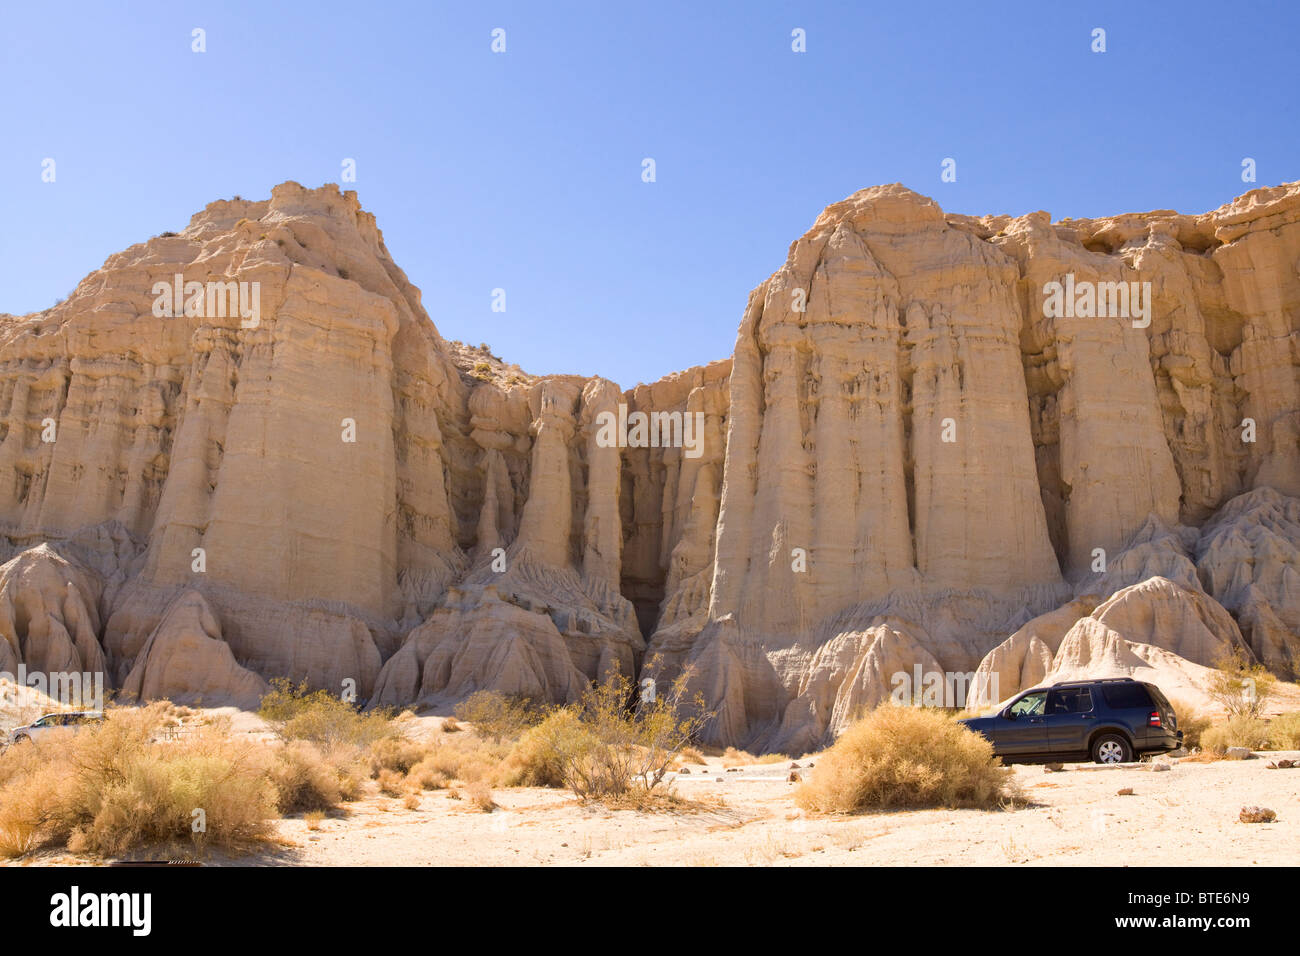 Red Rock Canyon State Park rock formations - California USA Stock Photo